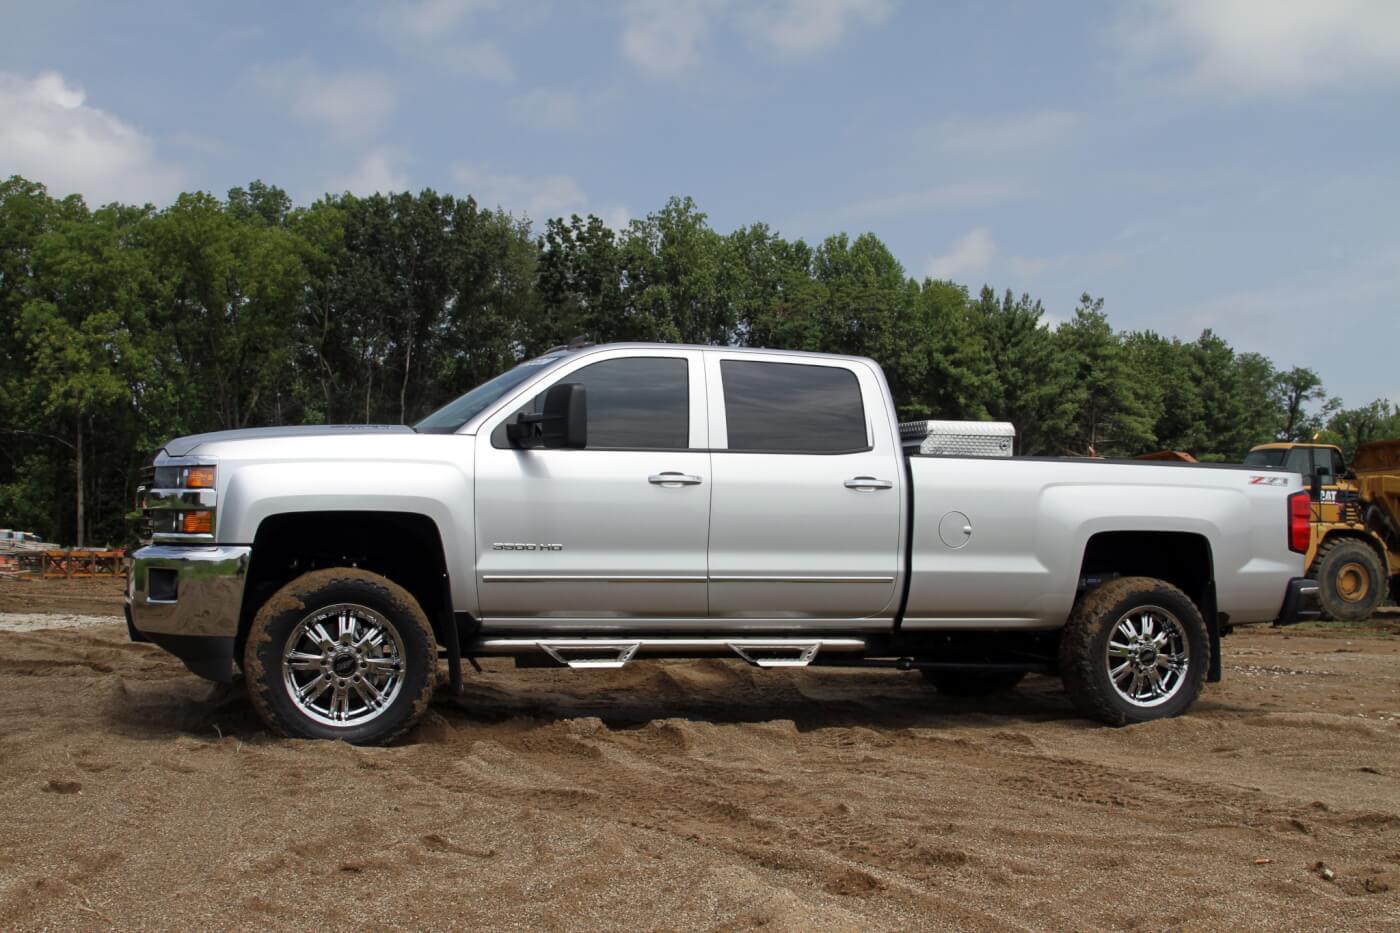 Randall did a lot of tweaking to get the Silverado’s stance just right, including modifying the front ride height and installing 1-inch lift blocks in the back. We think the 1-ton Chevy looks great.